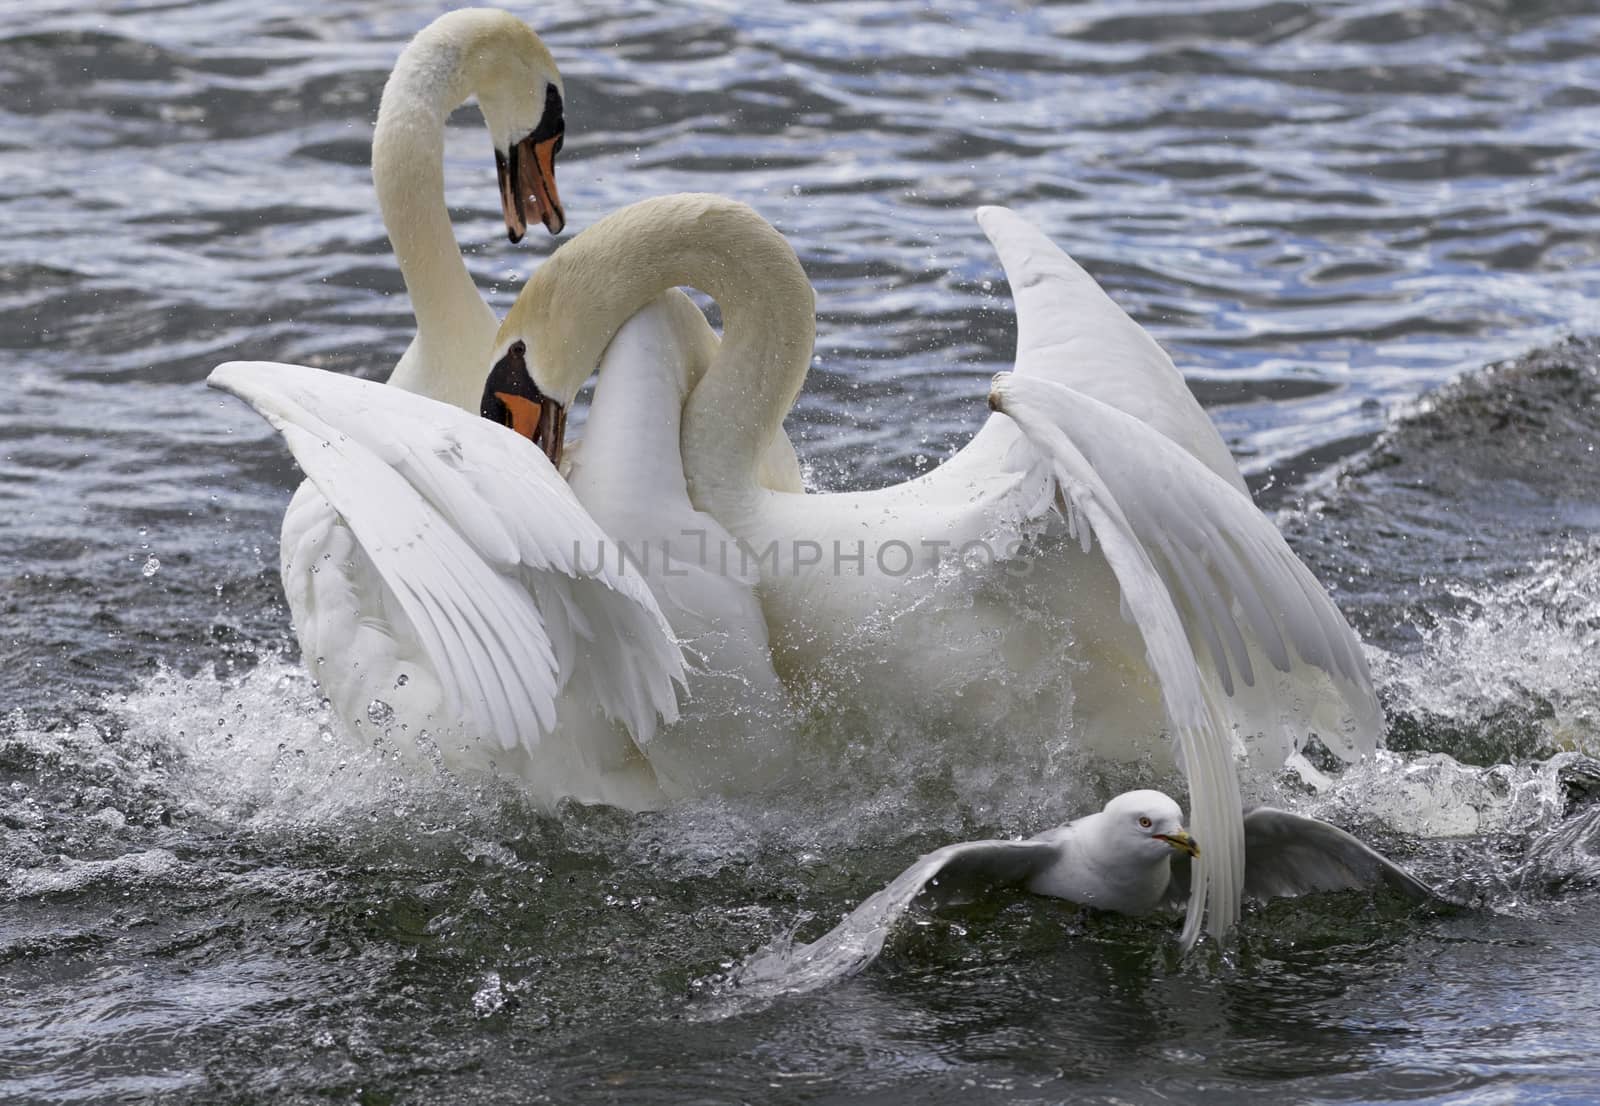 Amazing fight between the swans by teo